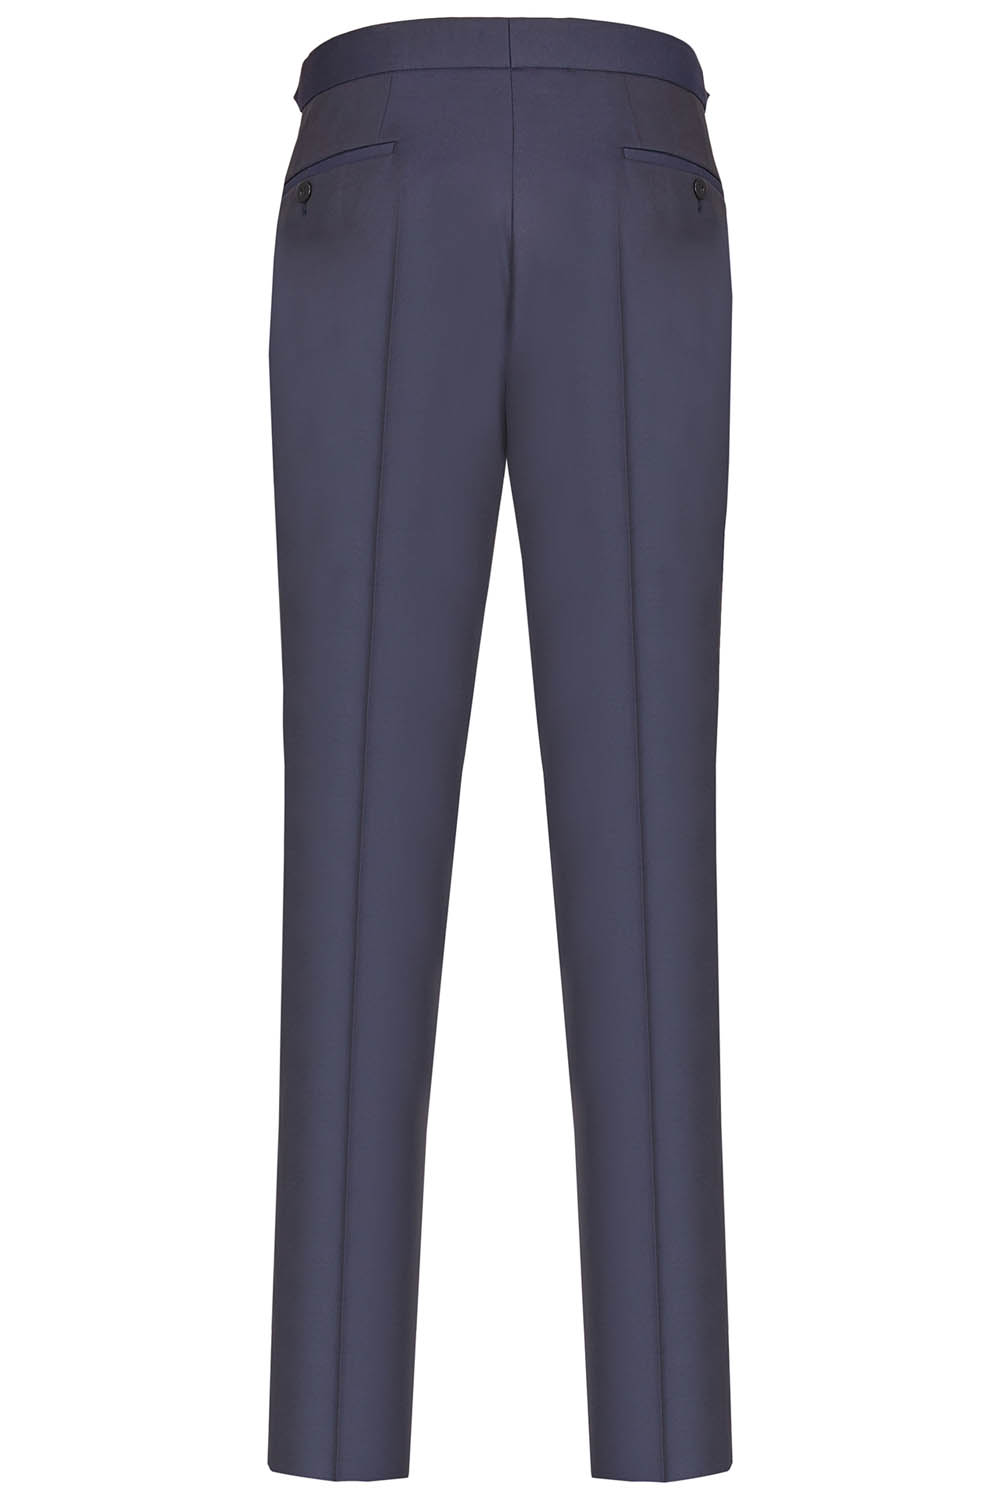 Royal Navy 3 Piece Suit - Tom Murphy's Formal and Menswear